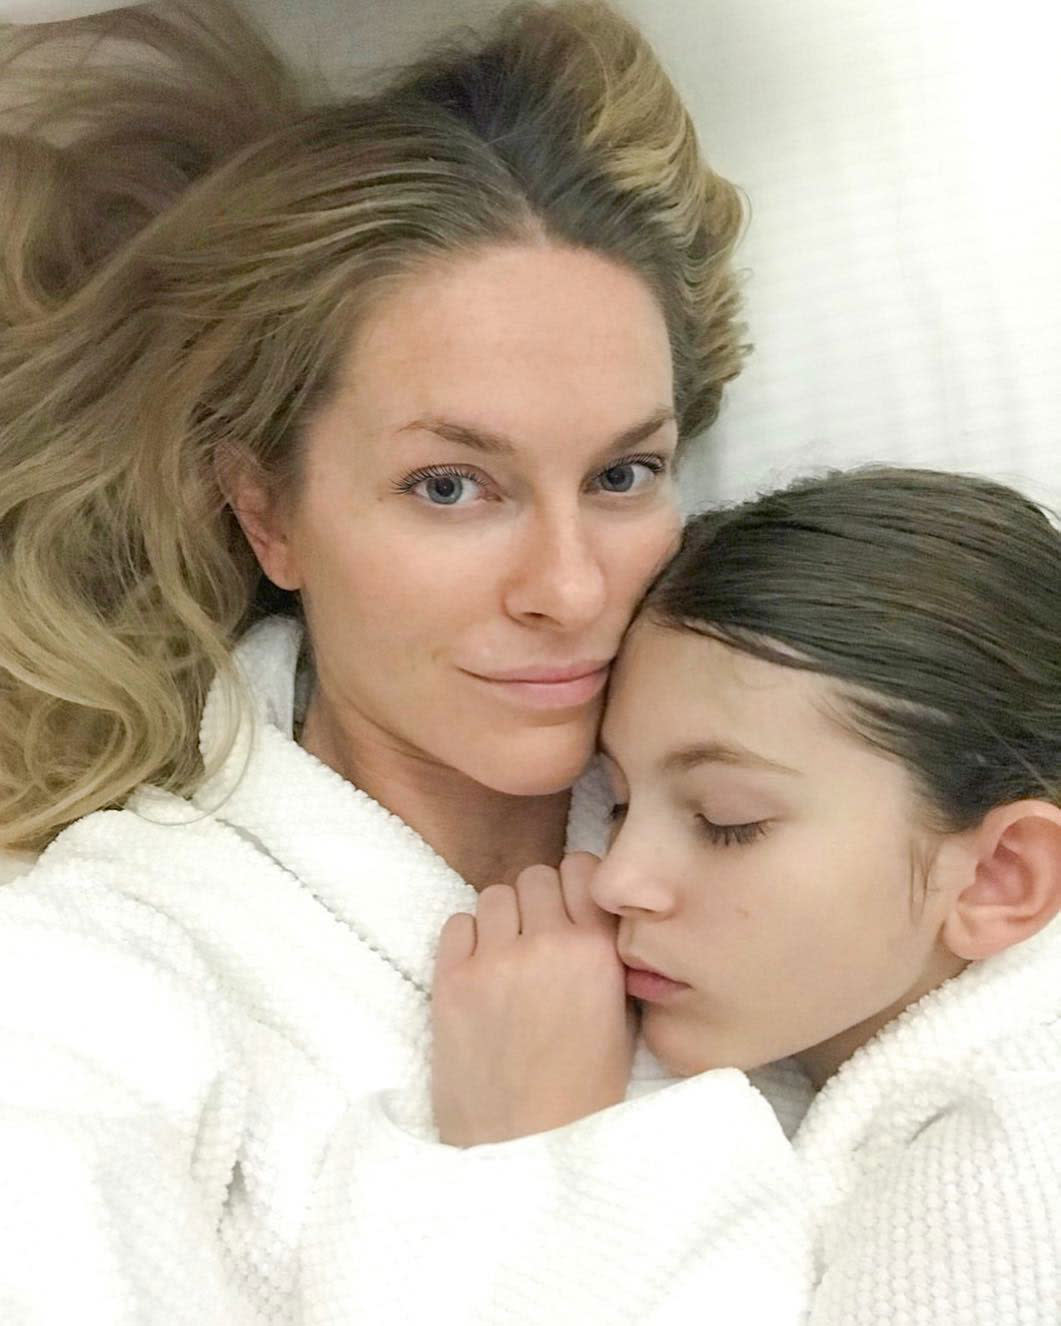 RHONY Leah McSweeney Says She’d Feel Like Giving Up Without Daughter Kier